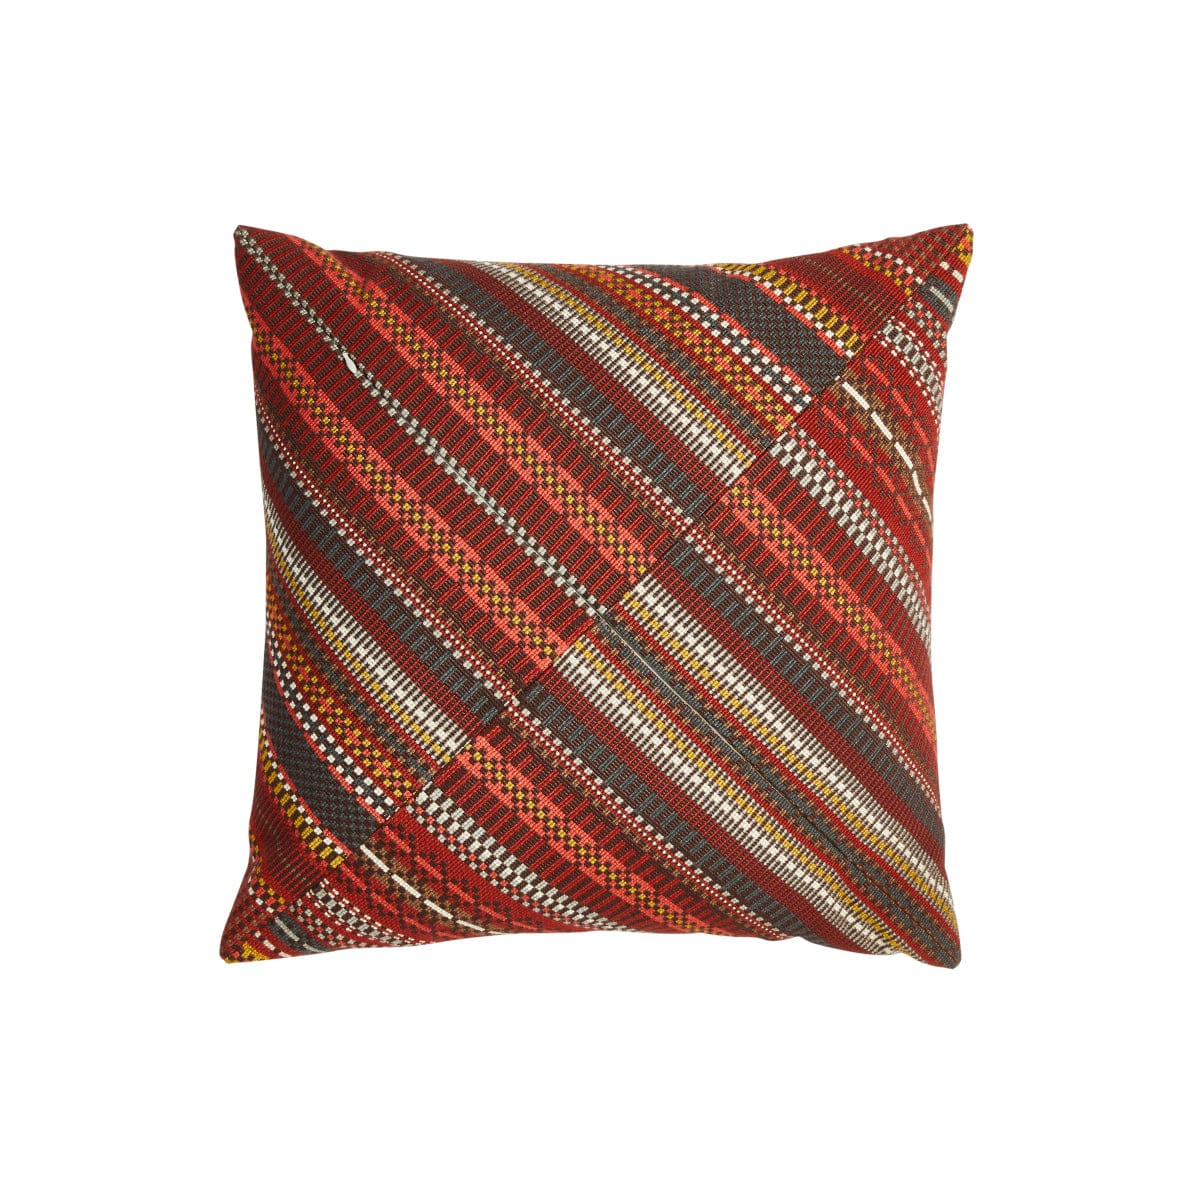 Hand Made Cushion - Striped Envelope